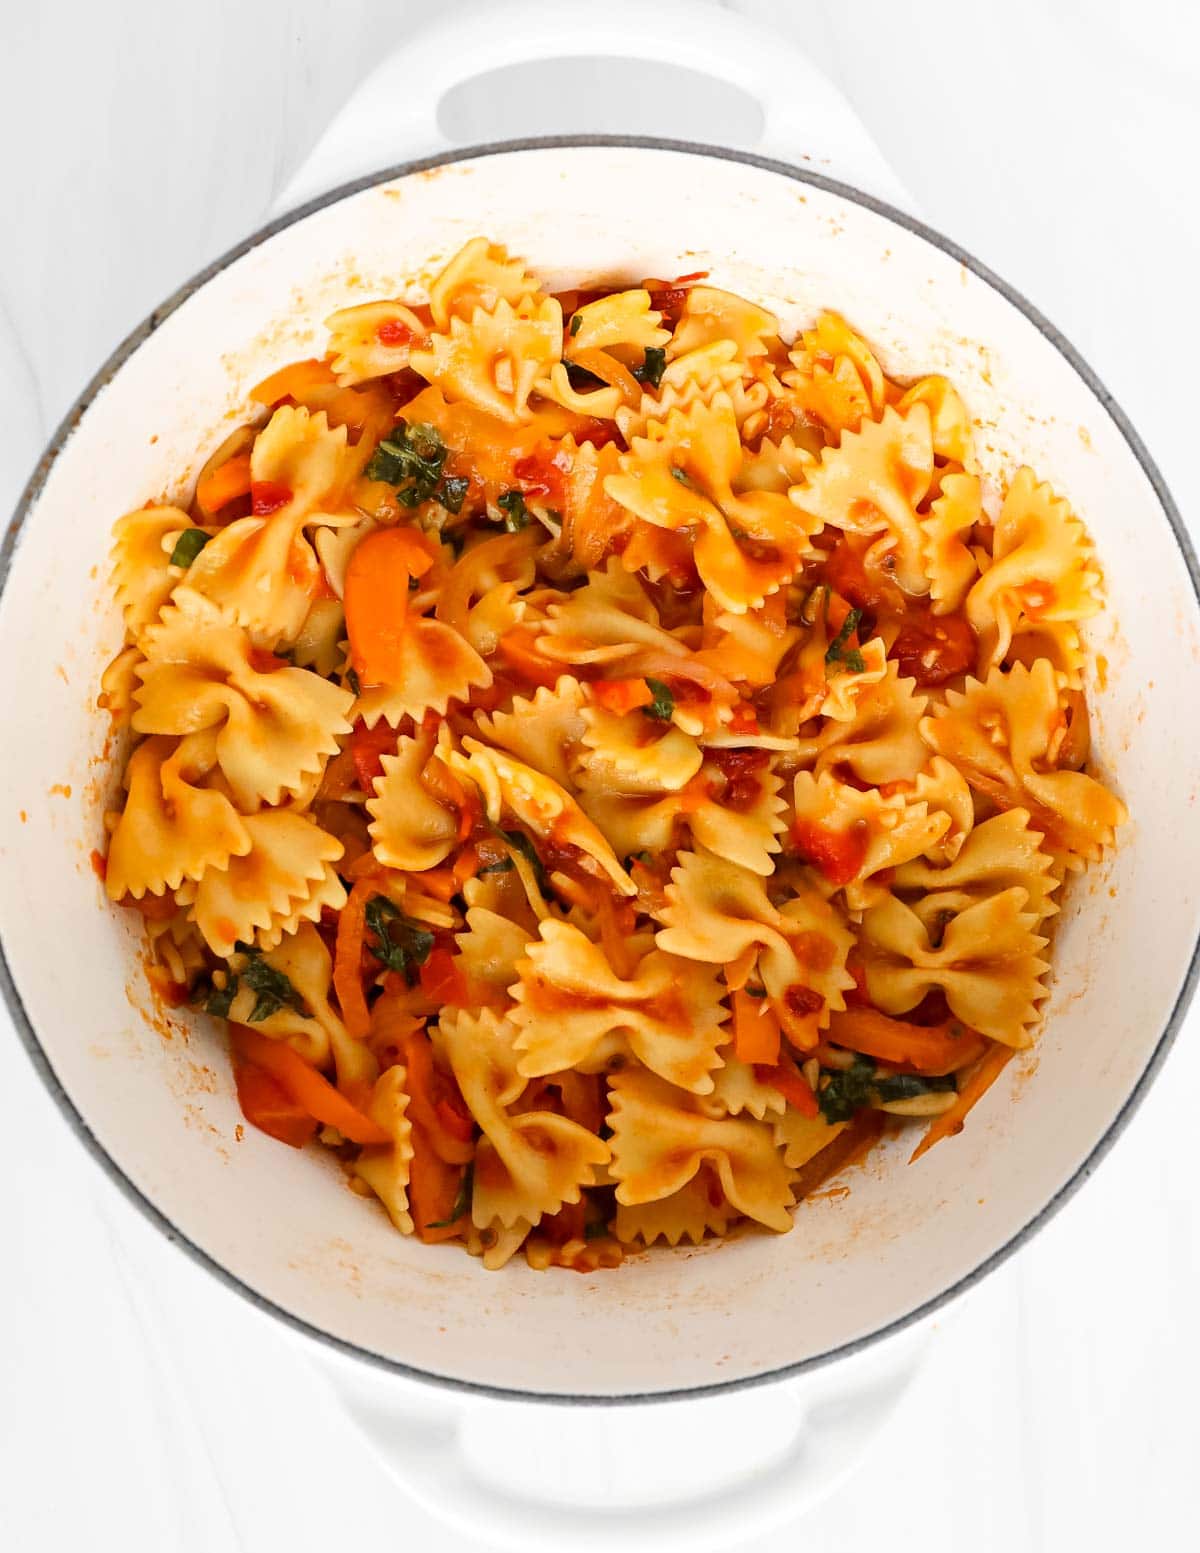 Pasta in a red sauce with vegetables in a large white pot.